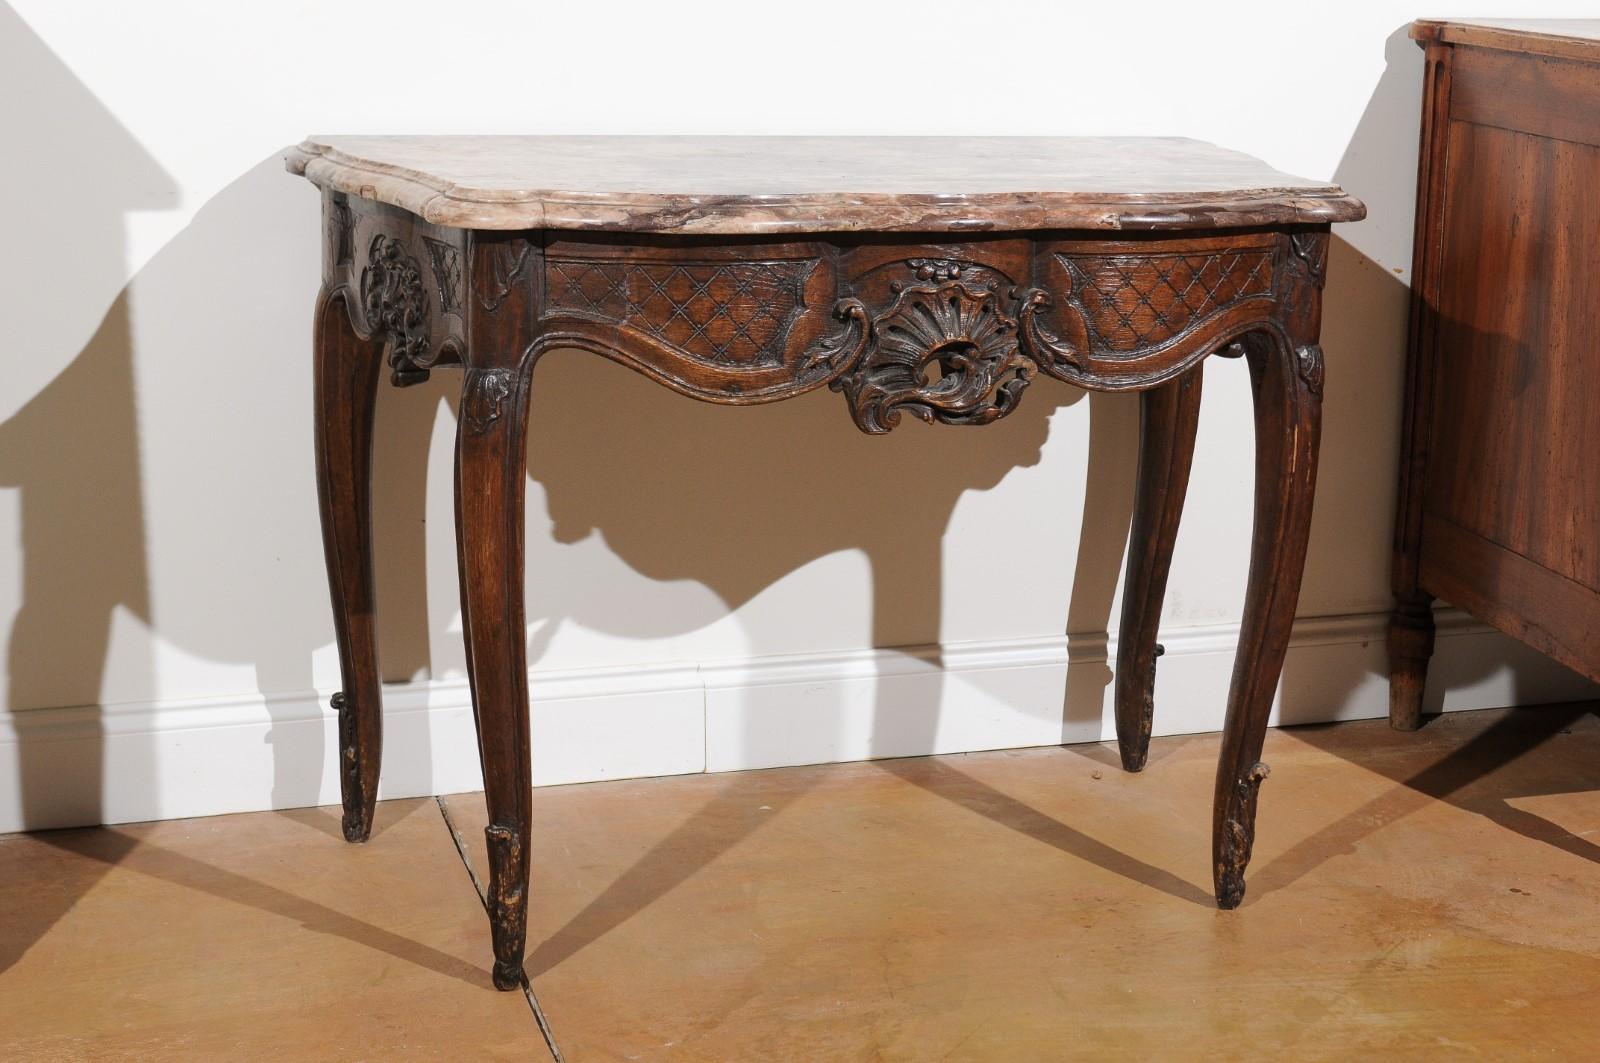 French 1720s Régence Period Walnut Console Table with Original Marble Top In Good Condition For Sale In Atlanta, GA